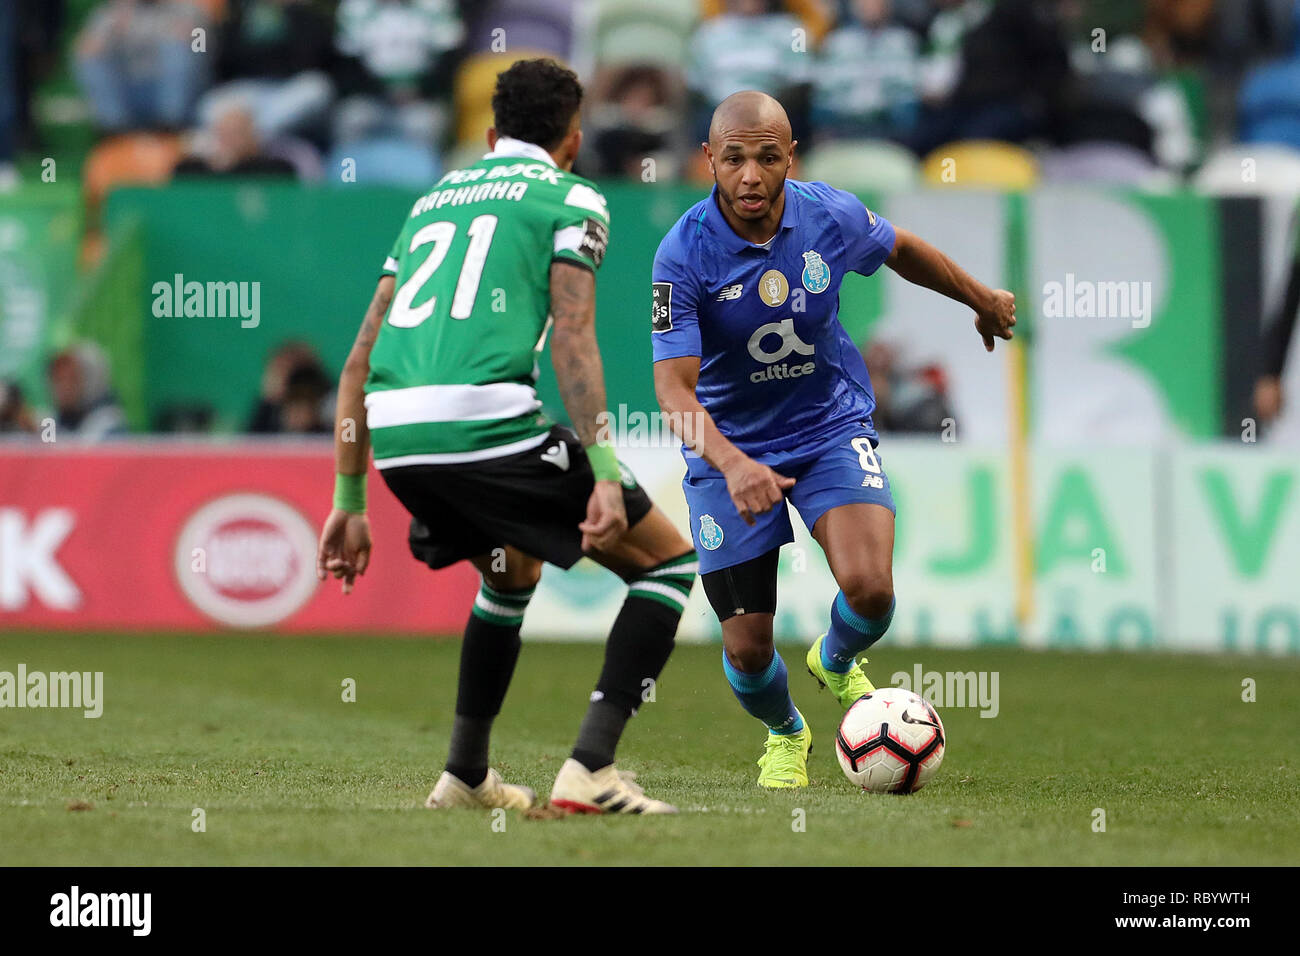 Yacine Brahimi of FC Porto seen in action during the League NOS 2018/19 football match between Sporting CP vs FC Porto. (Final score: Sporting CP 0 - 0 FC Porto) Stock Photo